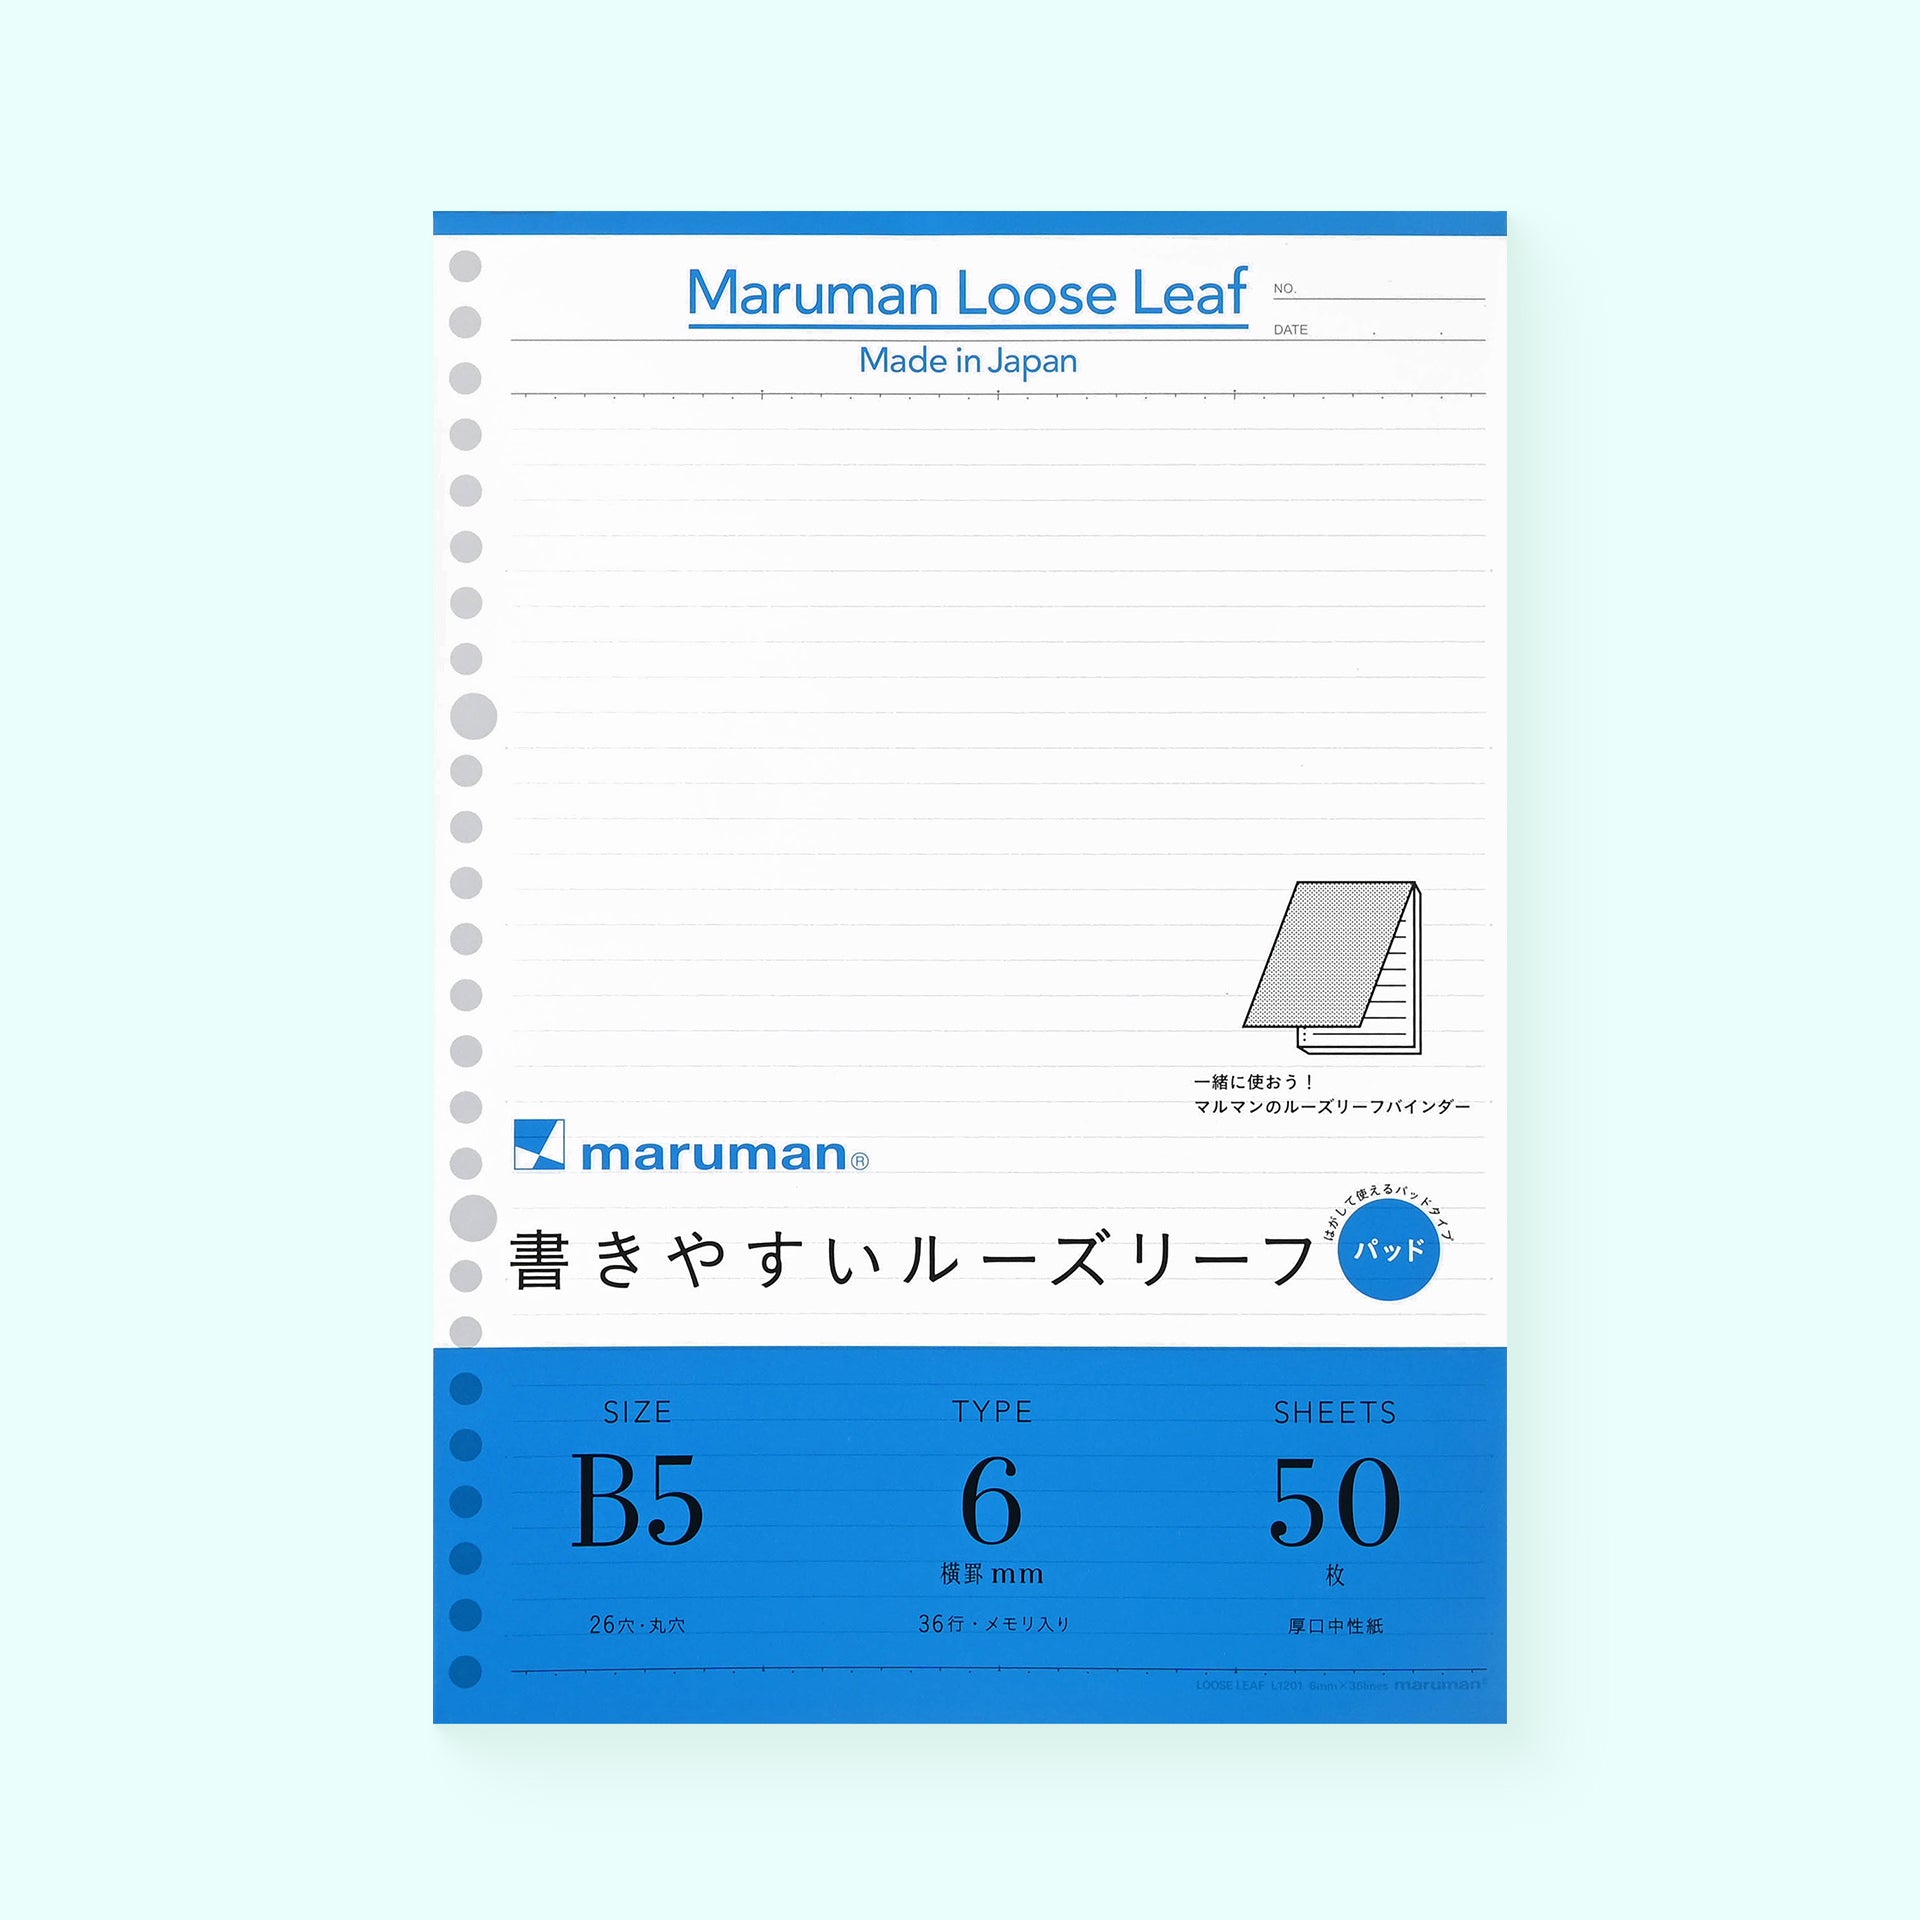 Maruman Loose Leaf "Easy To Write" Notepad B5 | Ruled or Graph Ruled